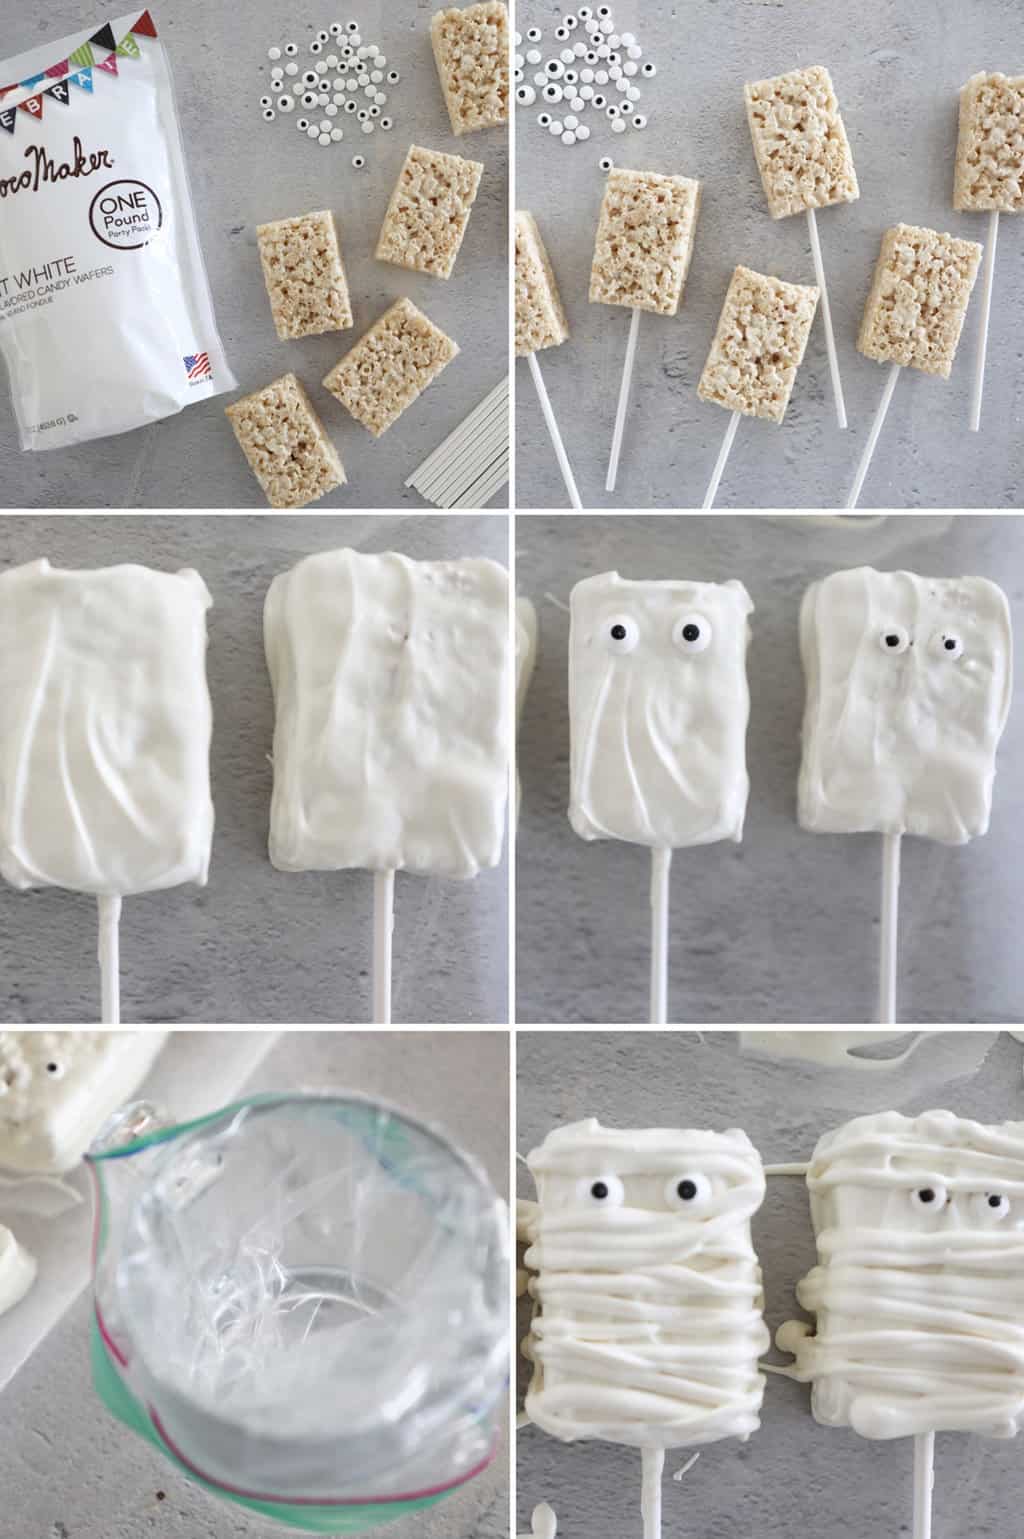 Six images combined showing steps for making Rice Krispie treat mummies.